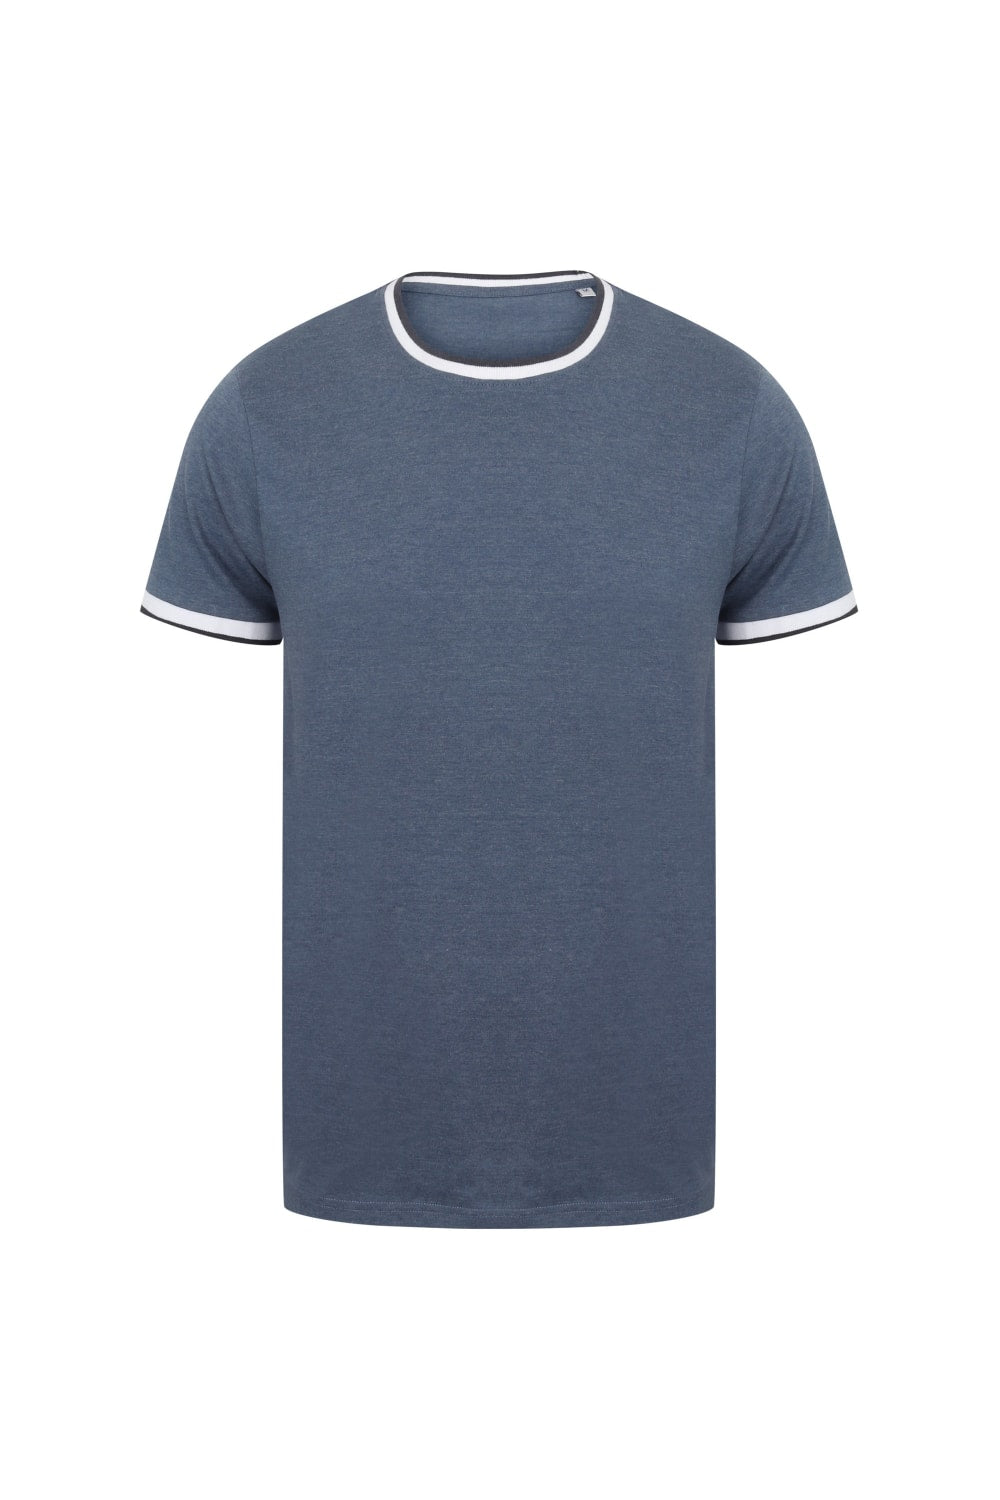 Front Row Mens Tag Free Tipped Tee (Blue Marl/White)